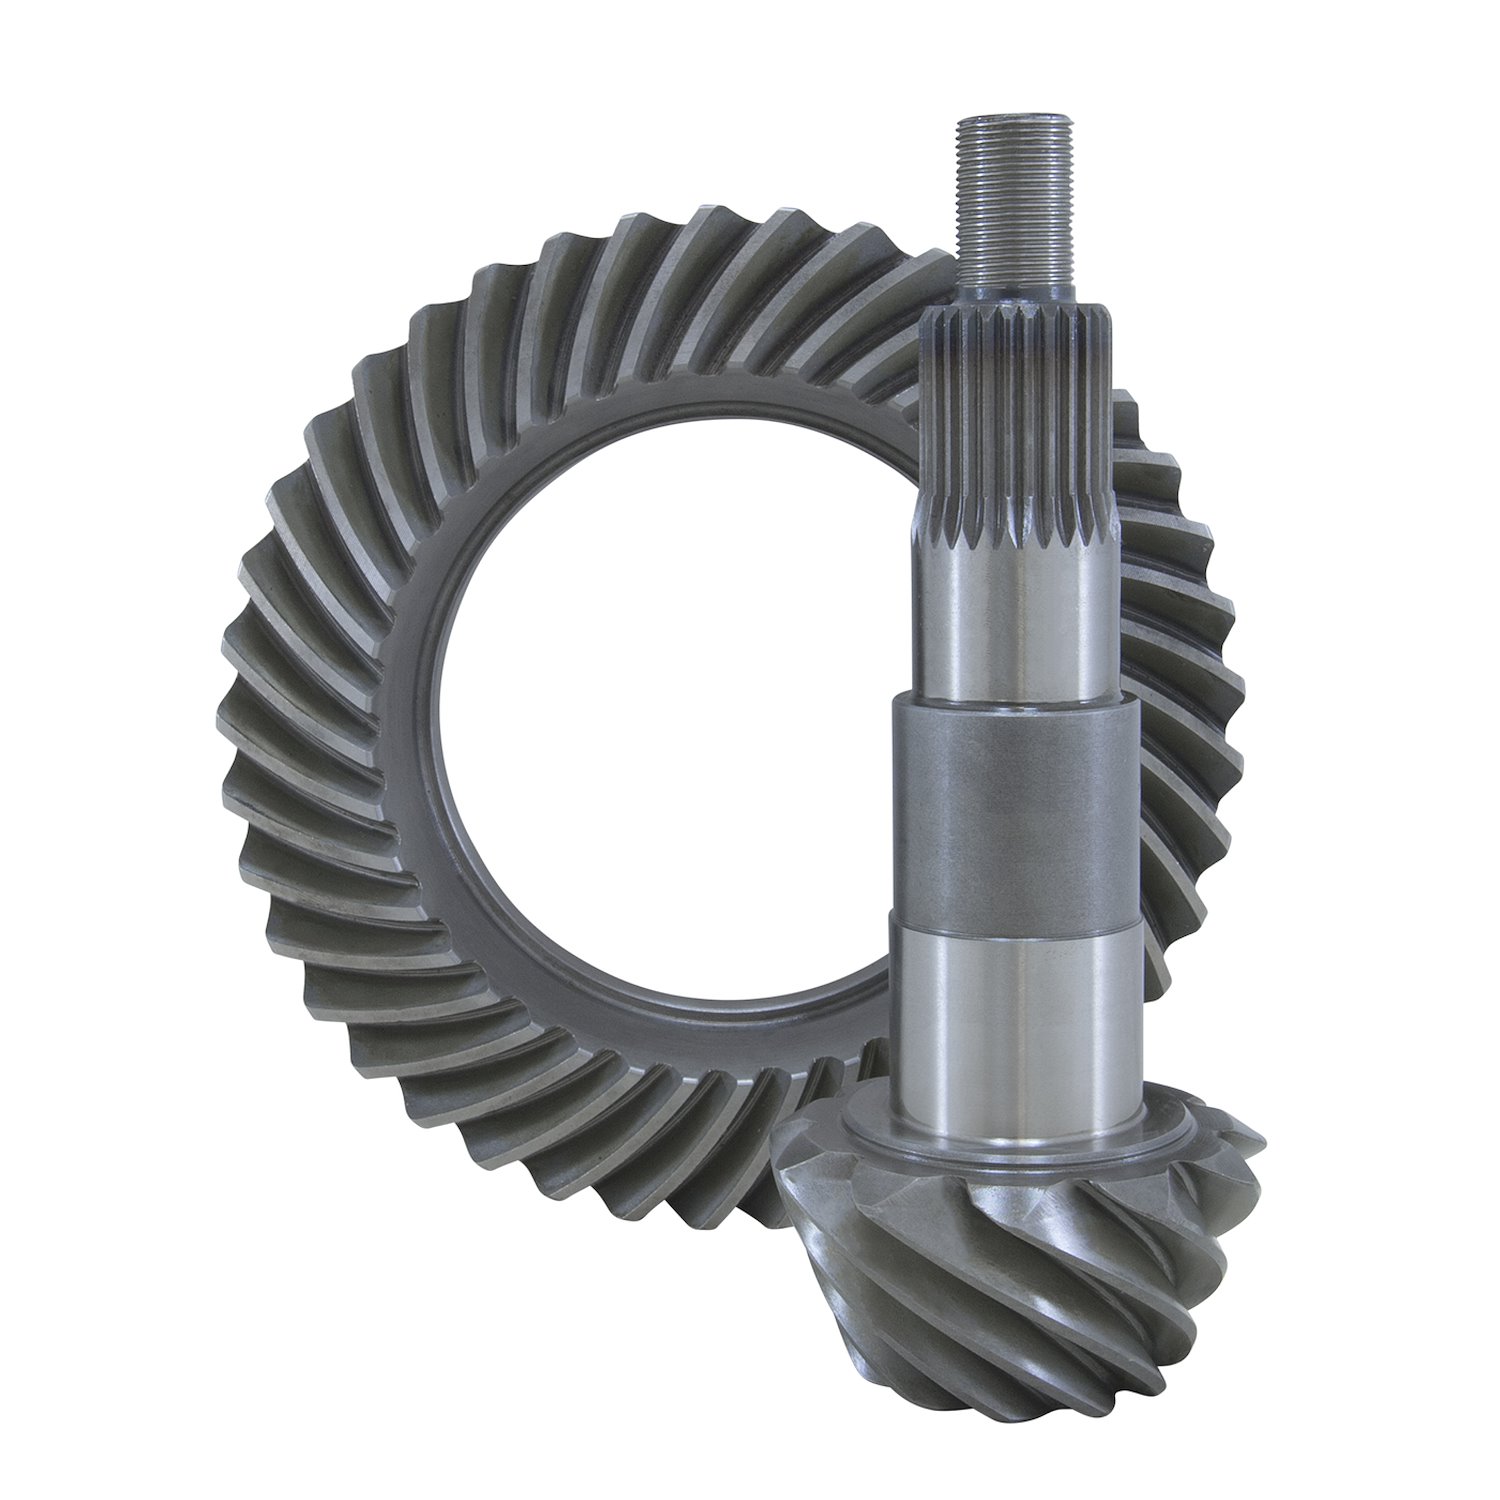 USA Standard ZG F7.5-308 Ring & Pinion Gear Set, For Ford 7.5 in., 3.08 Ratio